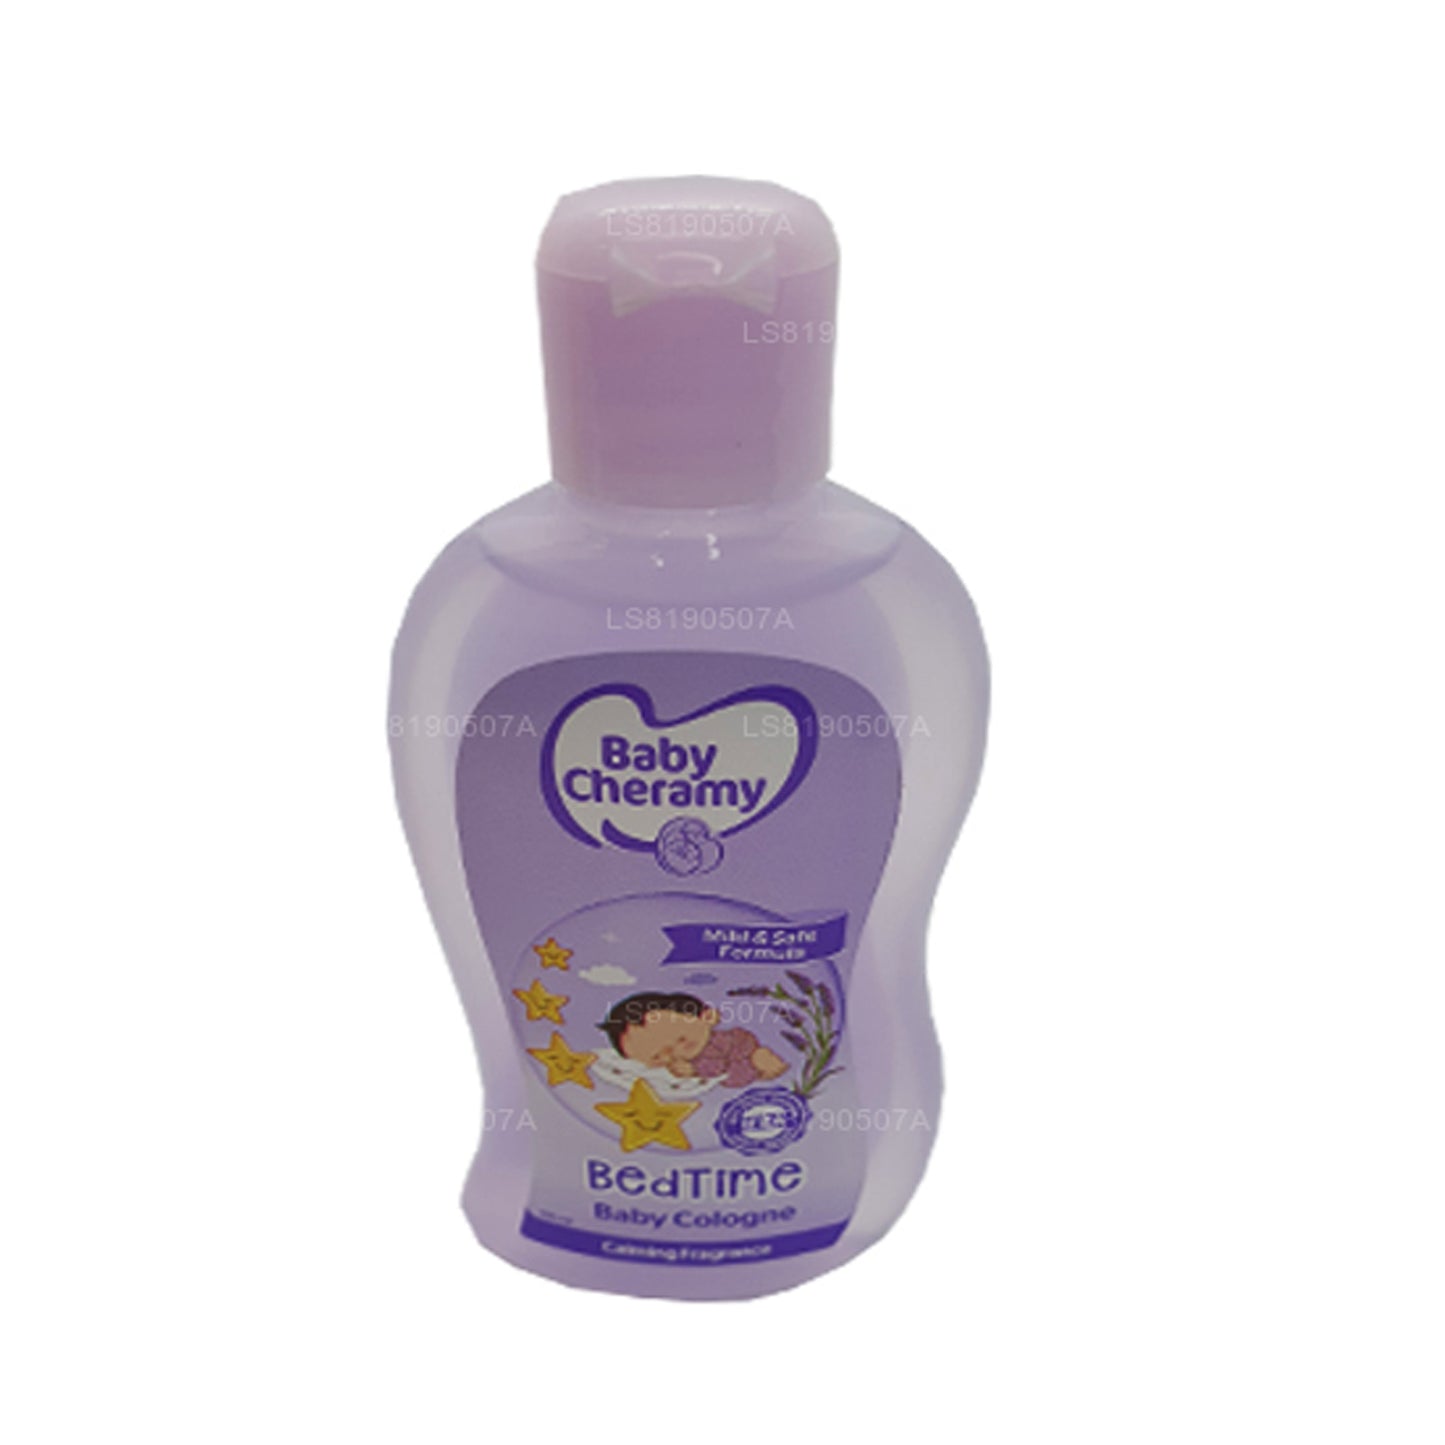 Baby Cheramy Bed Time Baby Cologne Calming Fragrance (100ml)